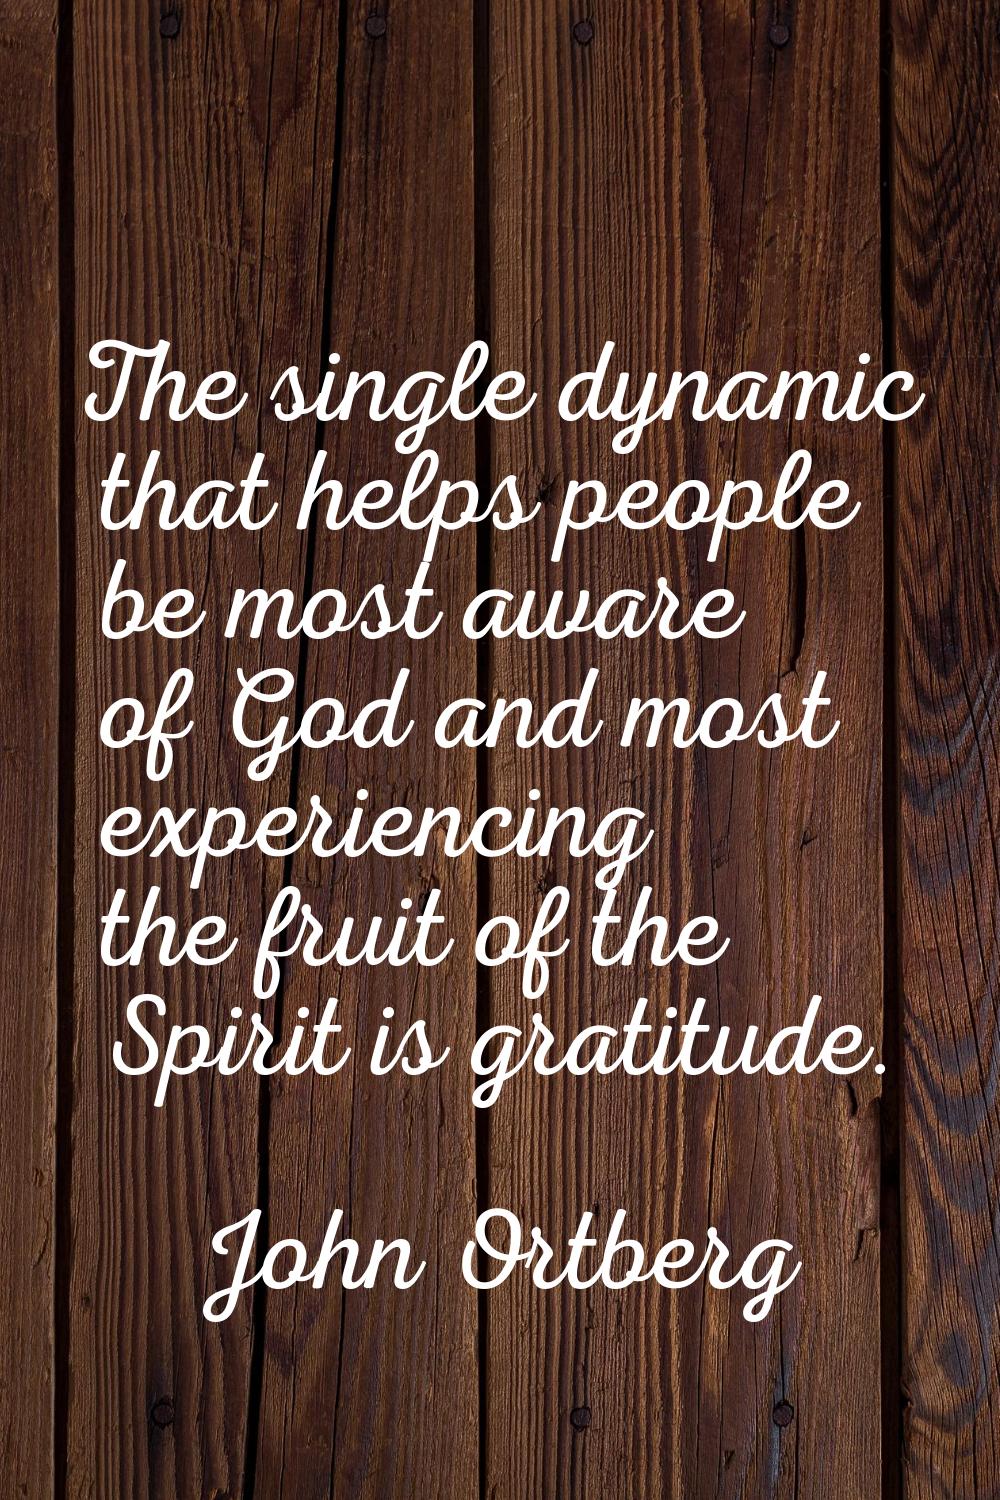 The single dynamic that helps people be most aware of God and most experiencing the fruit of the Sp